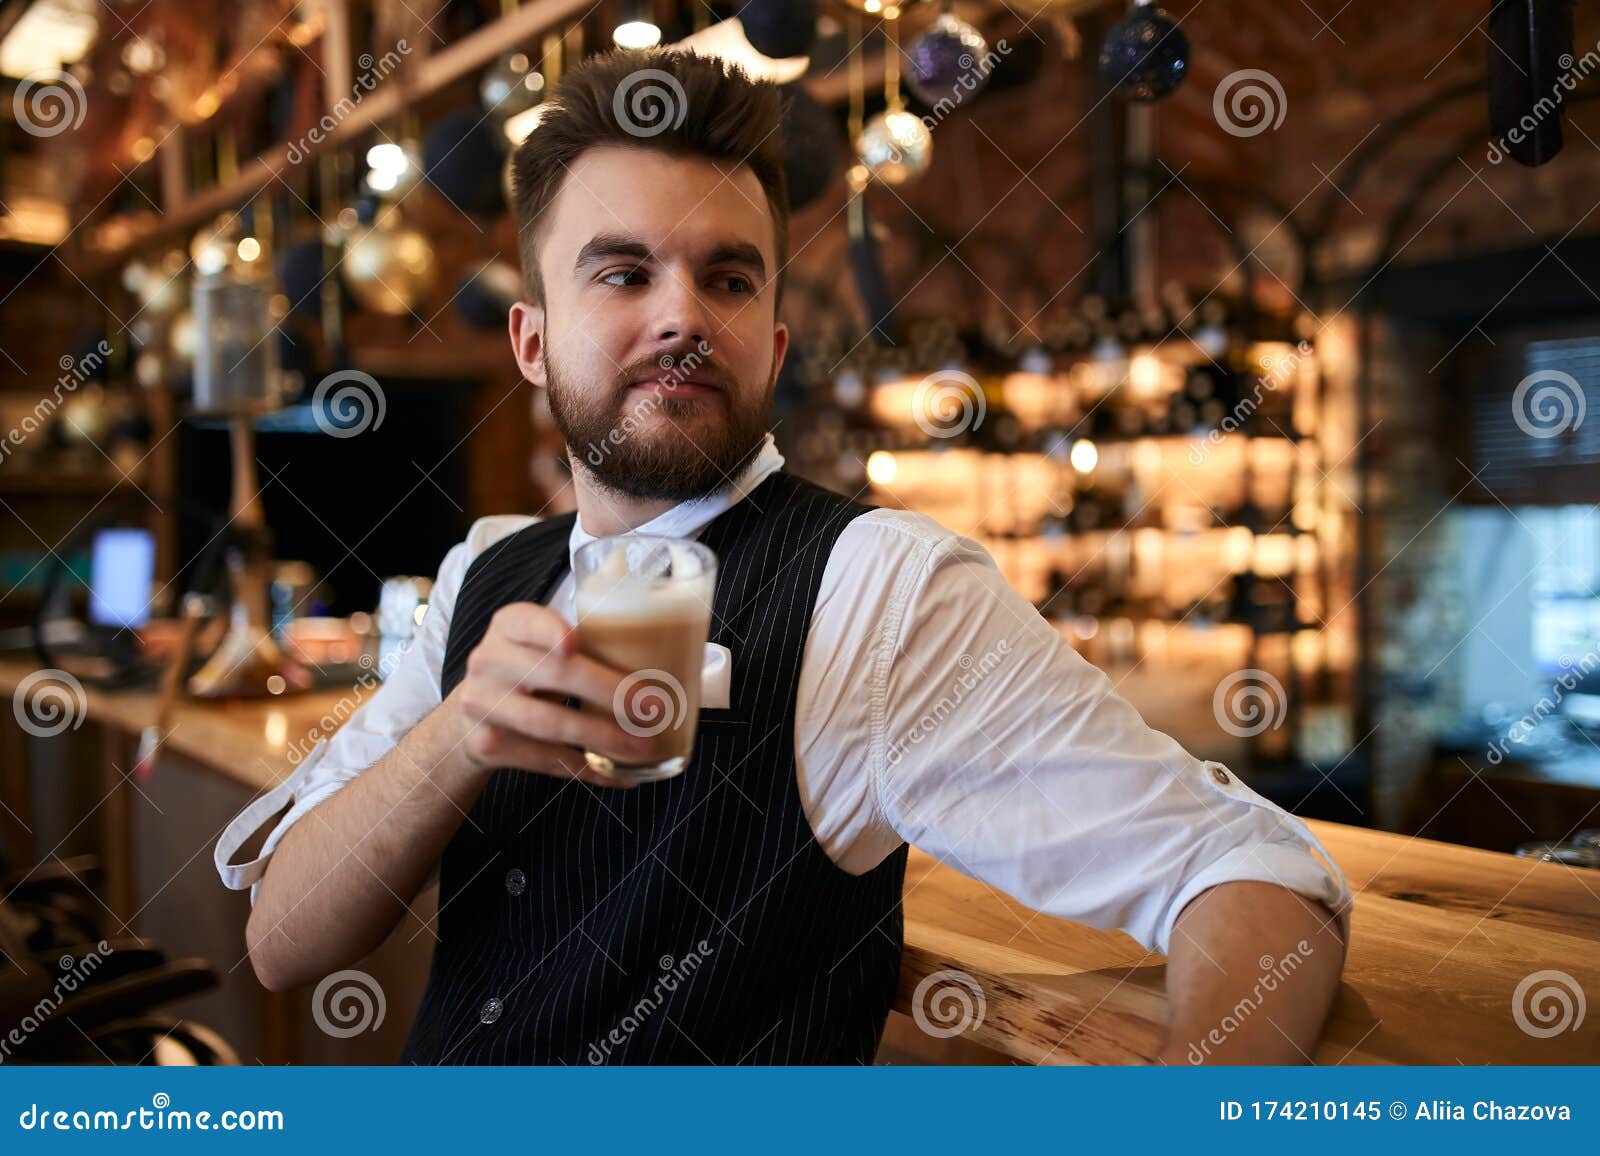 Portrait of Bearded Young Man Drinking Latte Stock Image - Image of ...